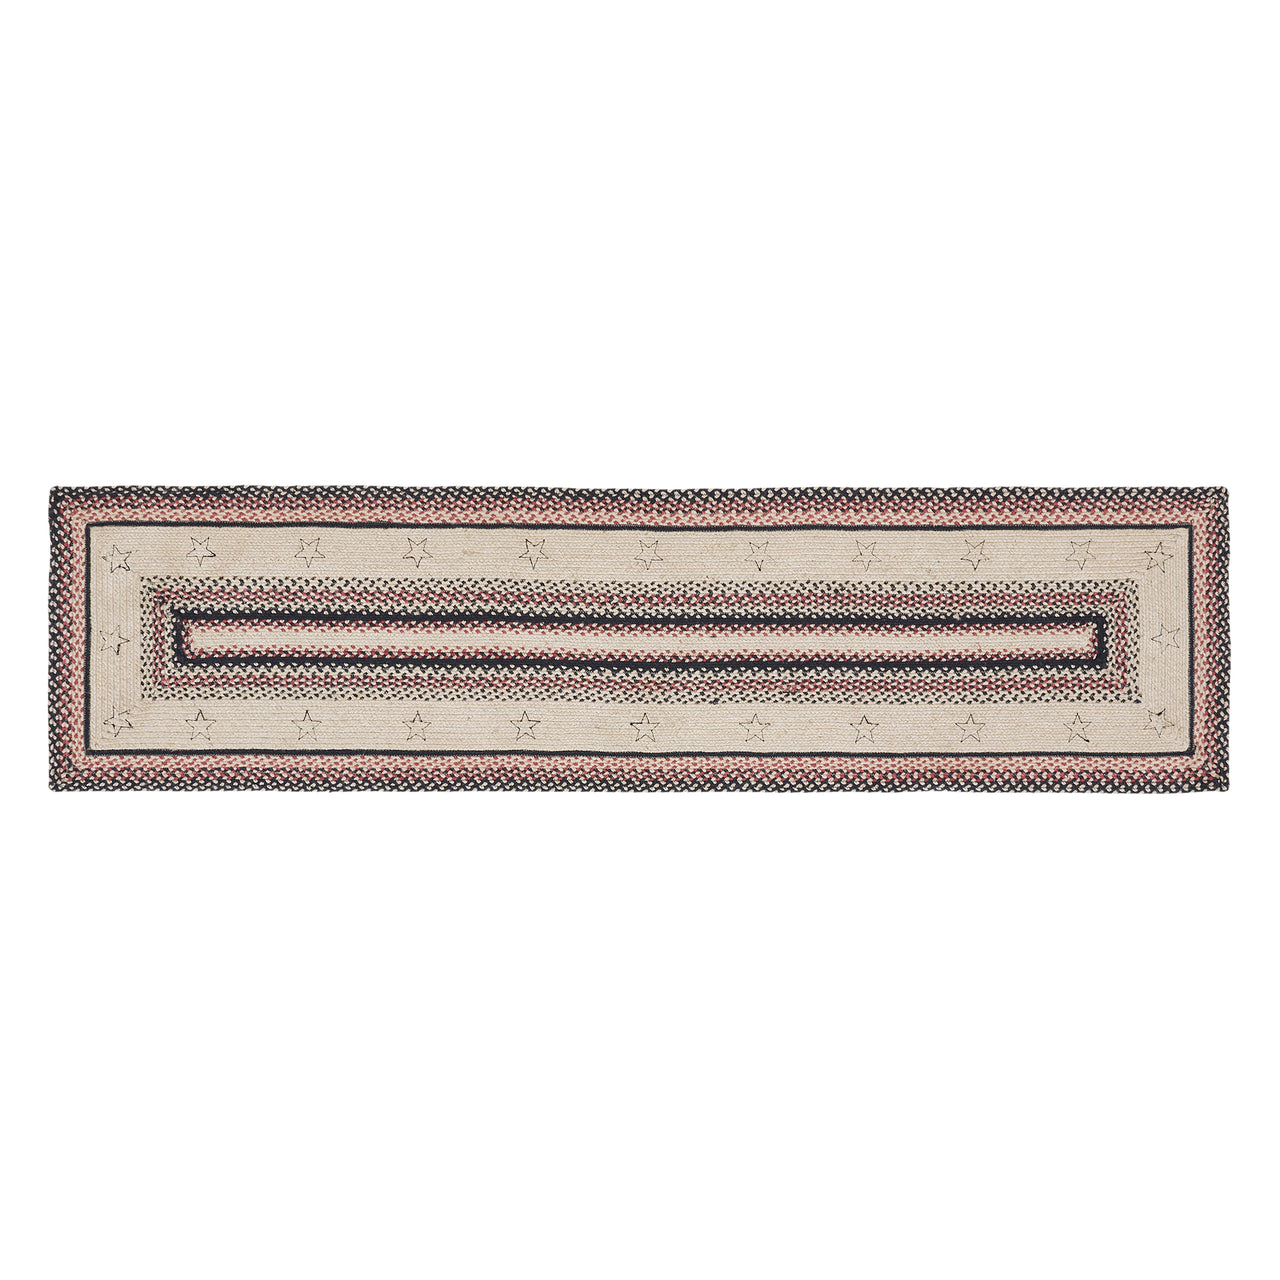 Colonial Star Jute Braided Rug/Runner Rect. with Rug Pad 2'x8' VHC Brands